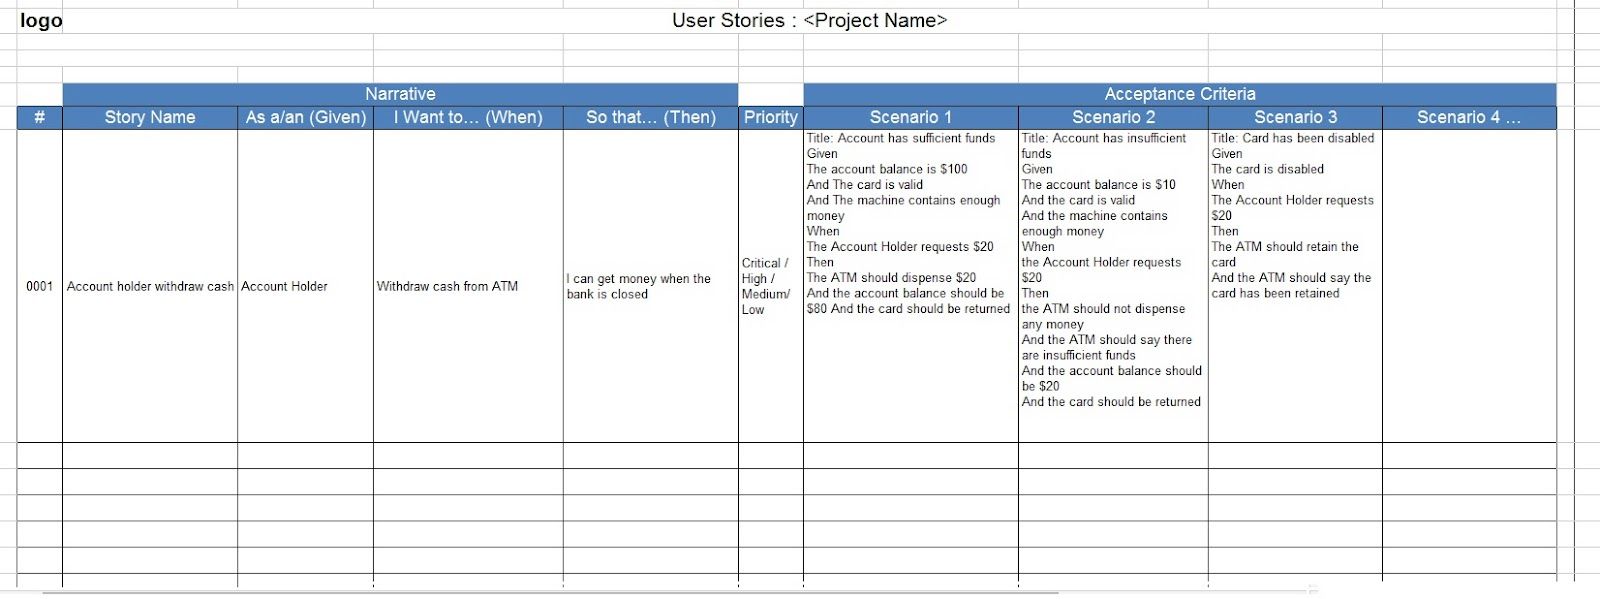 Blank Agile User Story Template Excel With Agile User Story Template Excel Sample